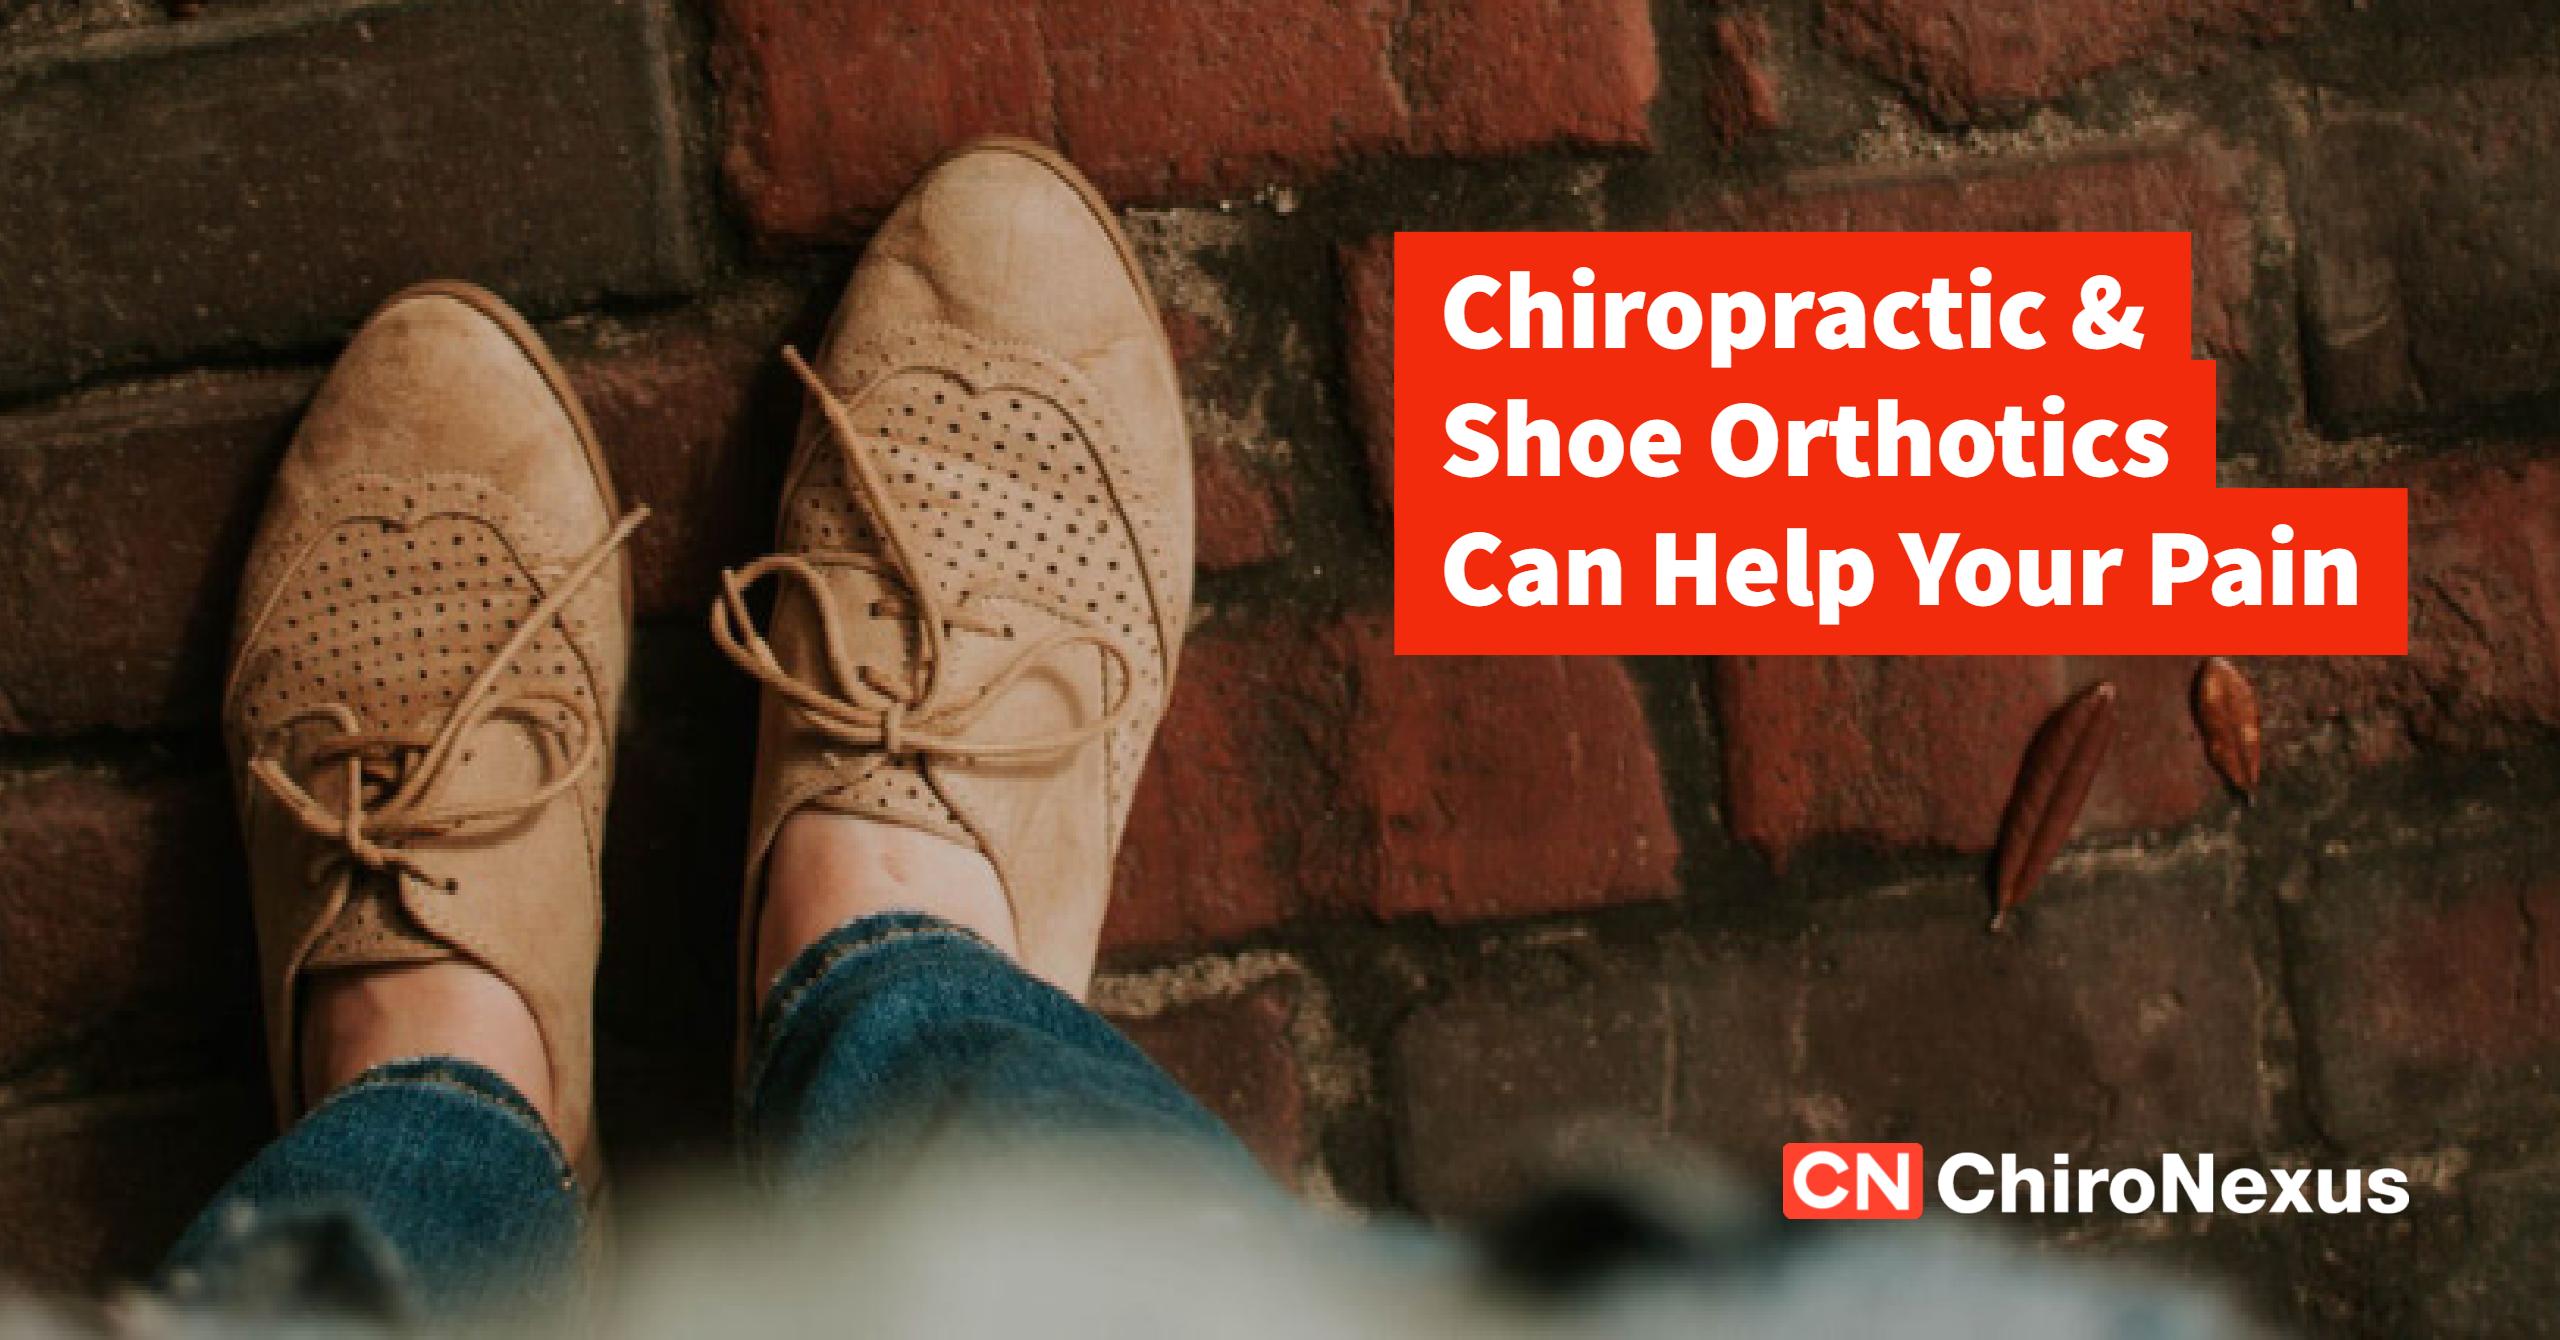 Shoe Orthotics Can Help Ease Chronic Low Back Pain From Wearing Painful Shoes